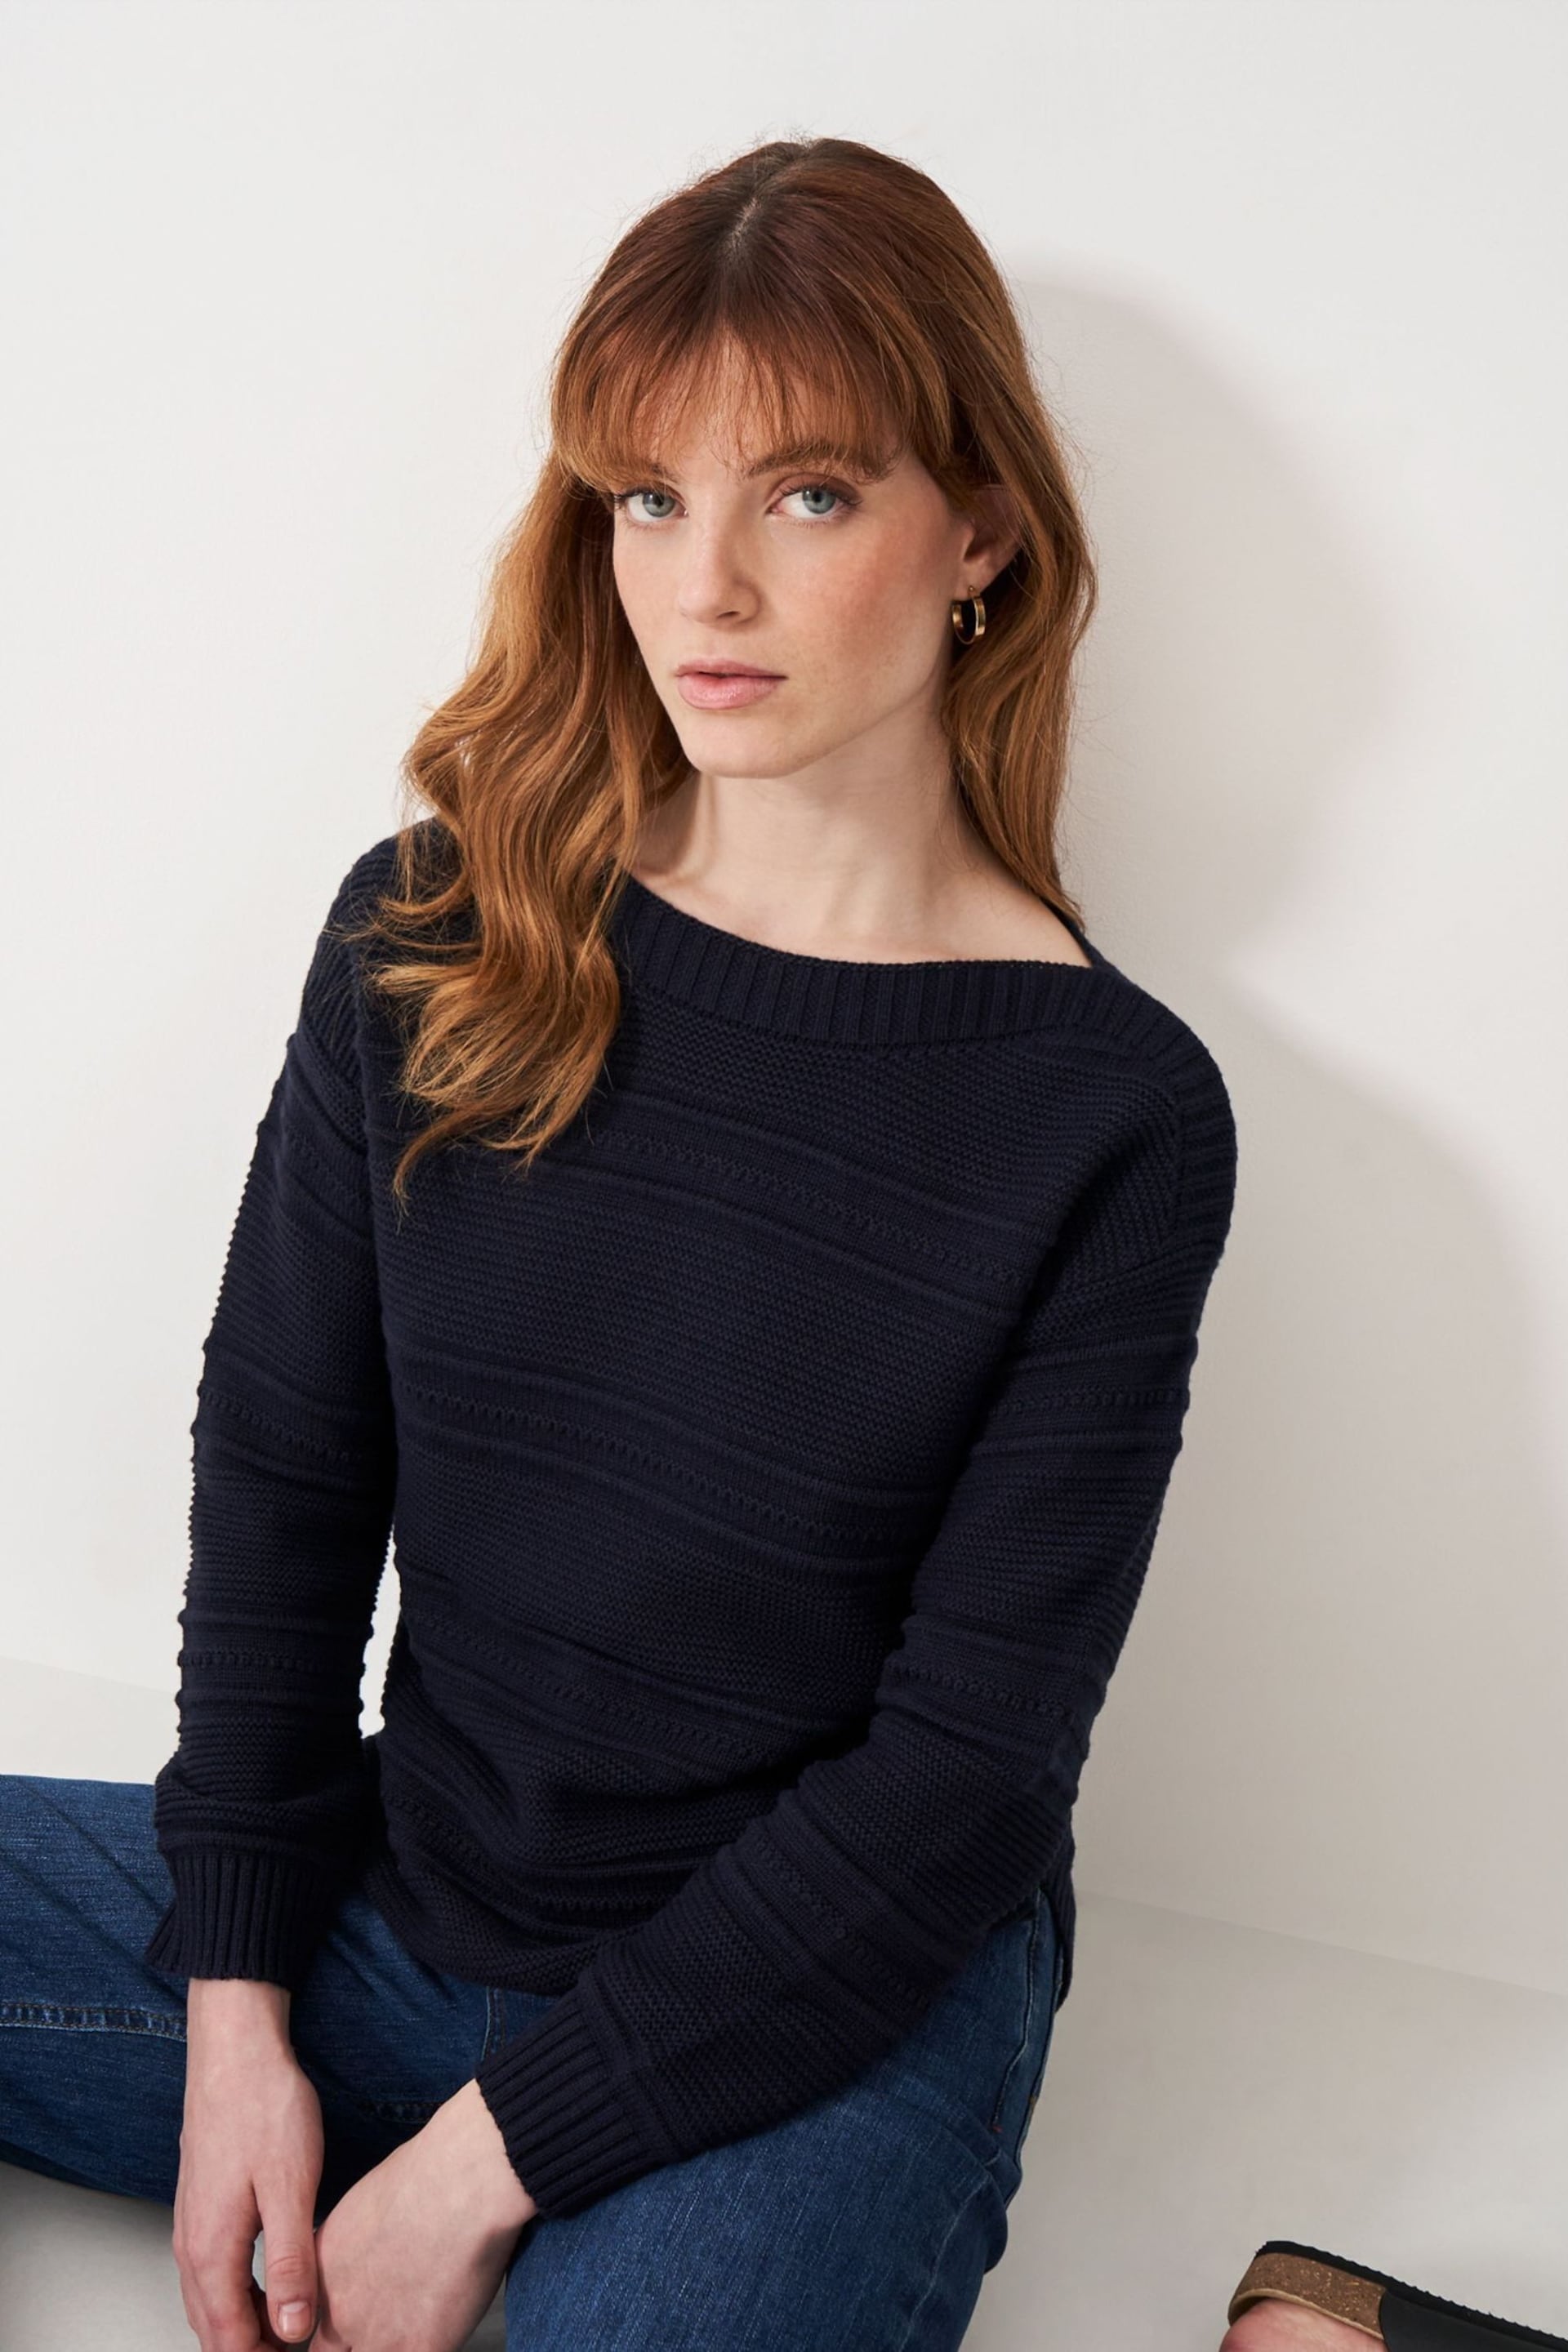 Crew Clothing Tali Knit Jumper - Image 1 of 6